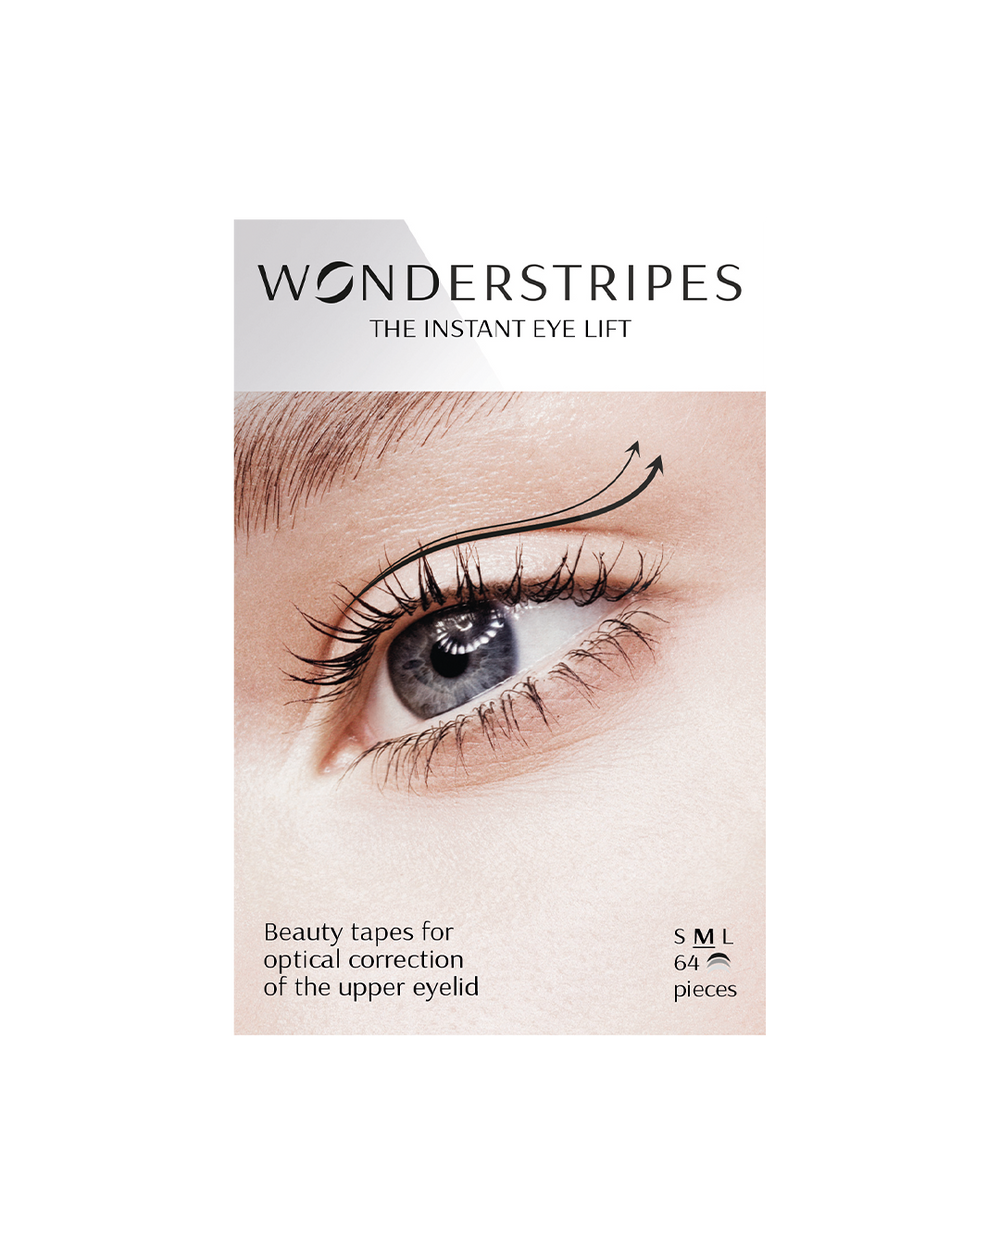 Eyelid lifting stickers with an immediate effect